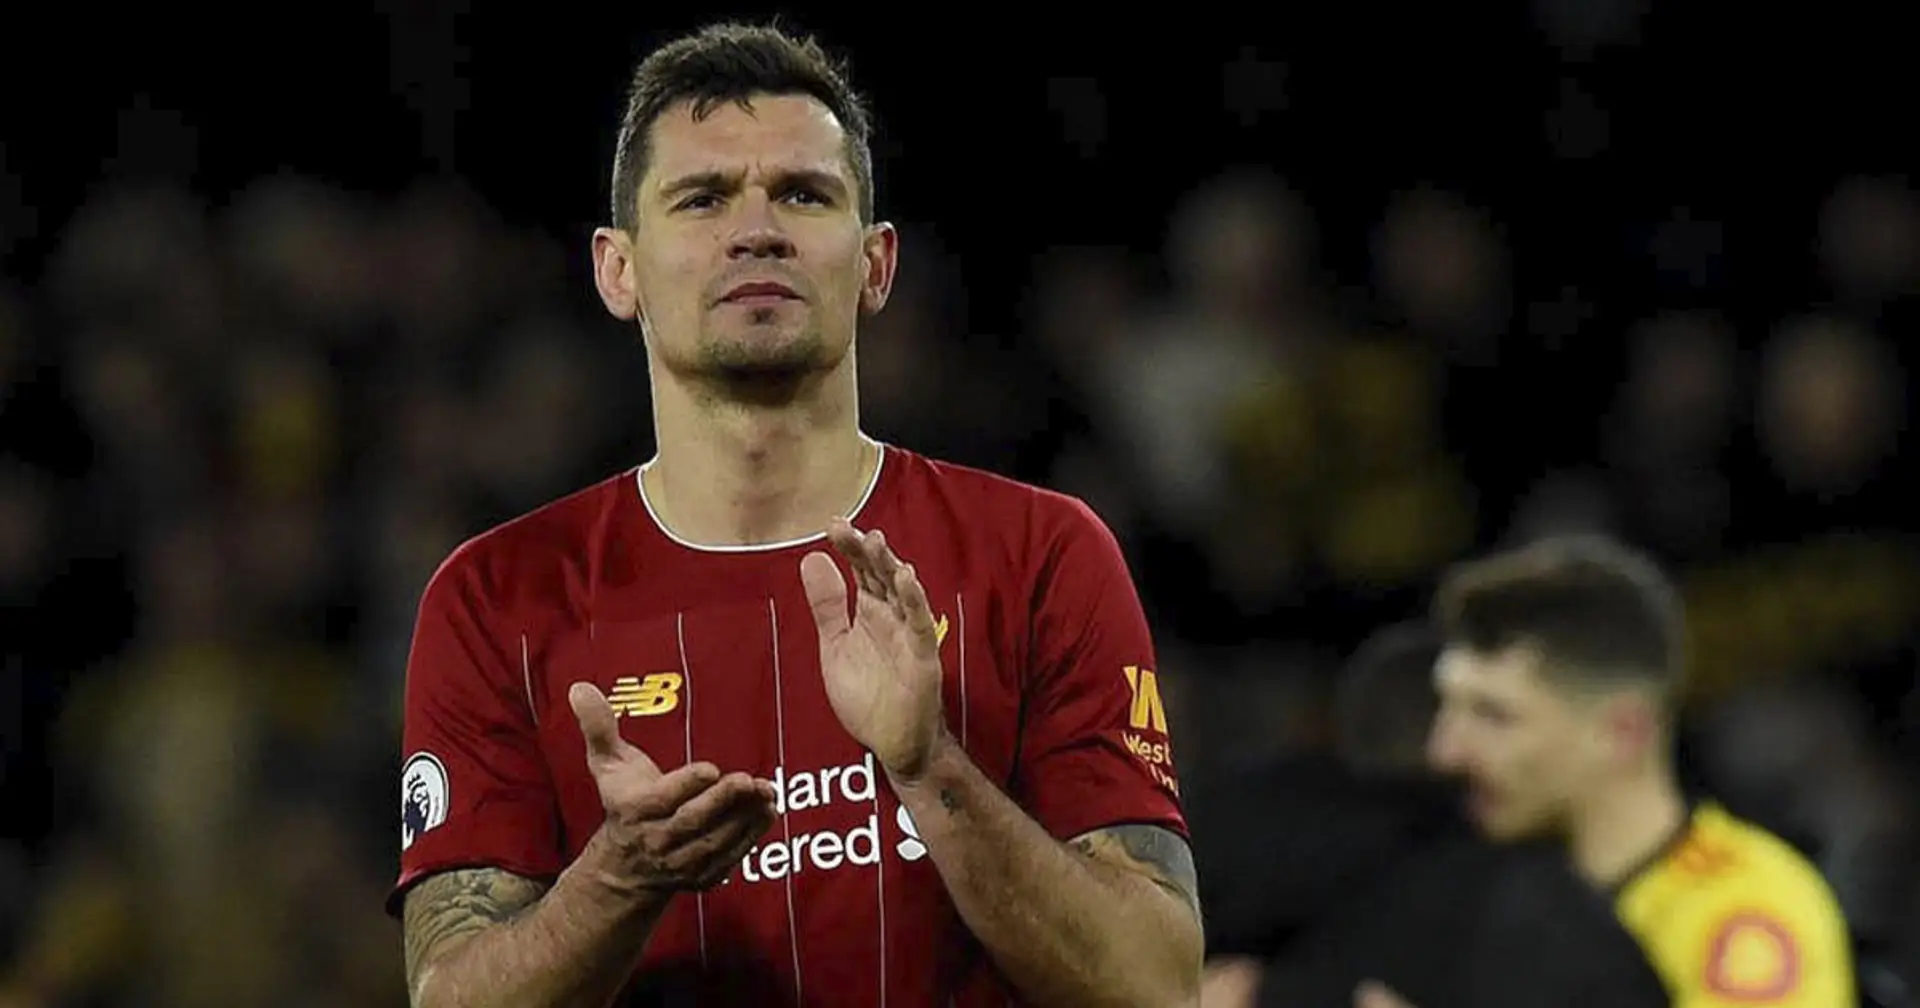 🗣️ BIG TOPIC DISCUSSION: Who should replace Lovren if he leaves in the summer?